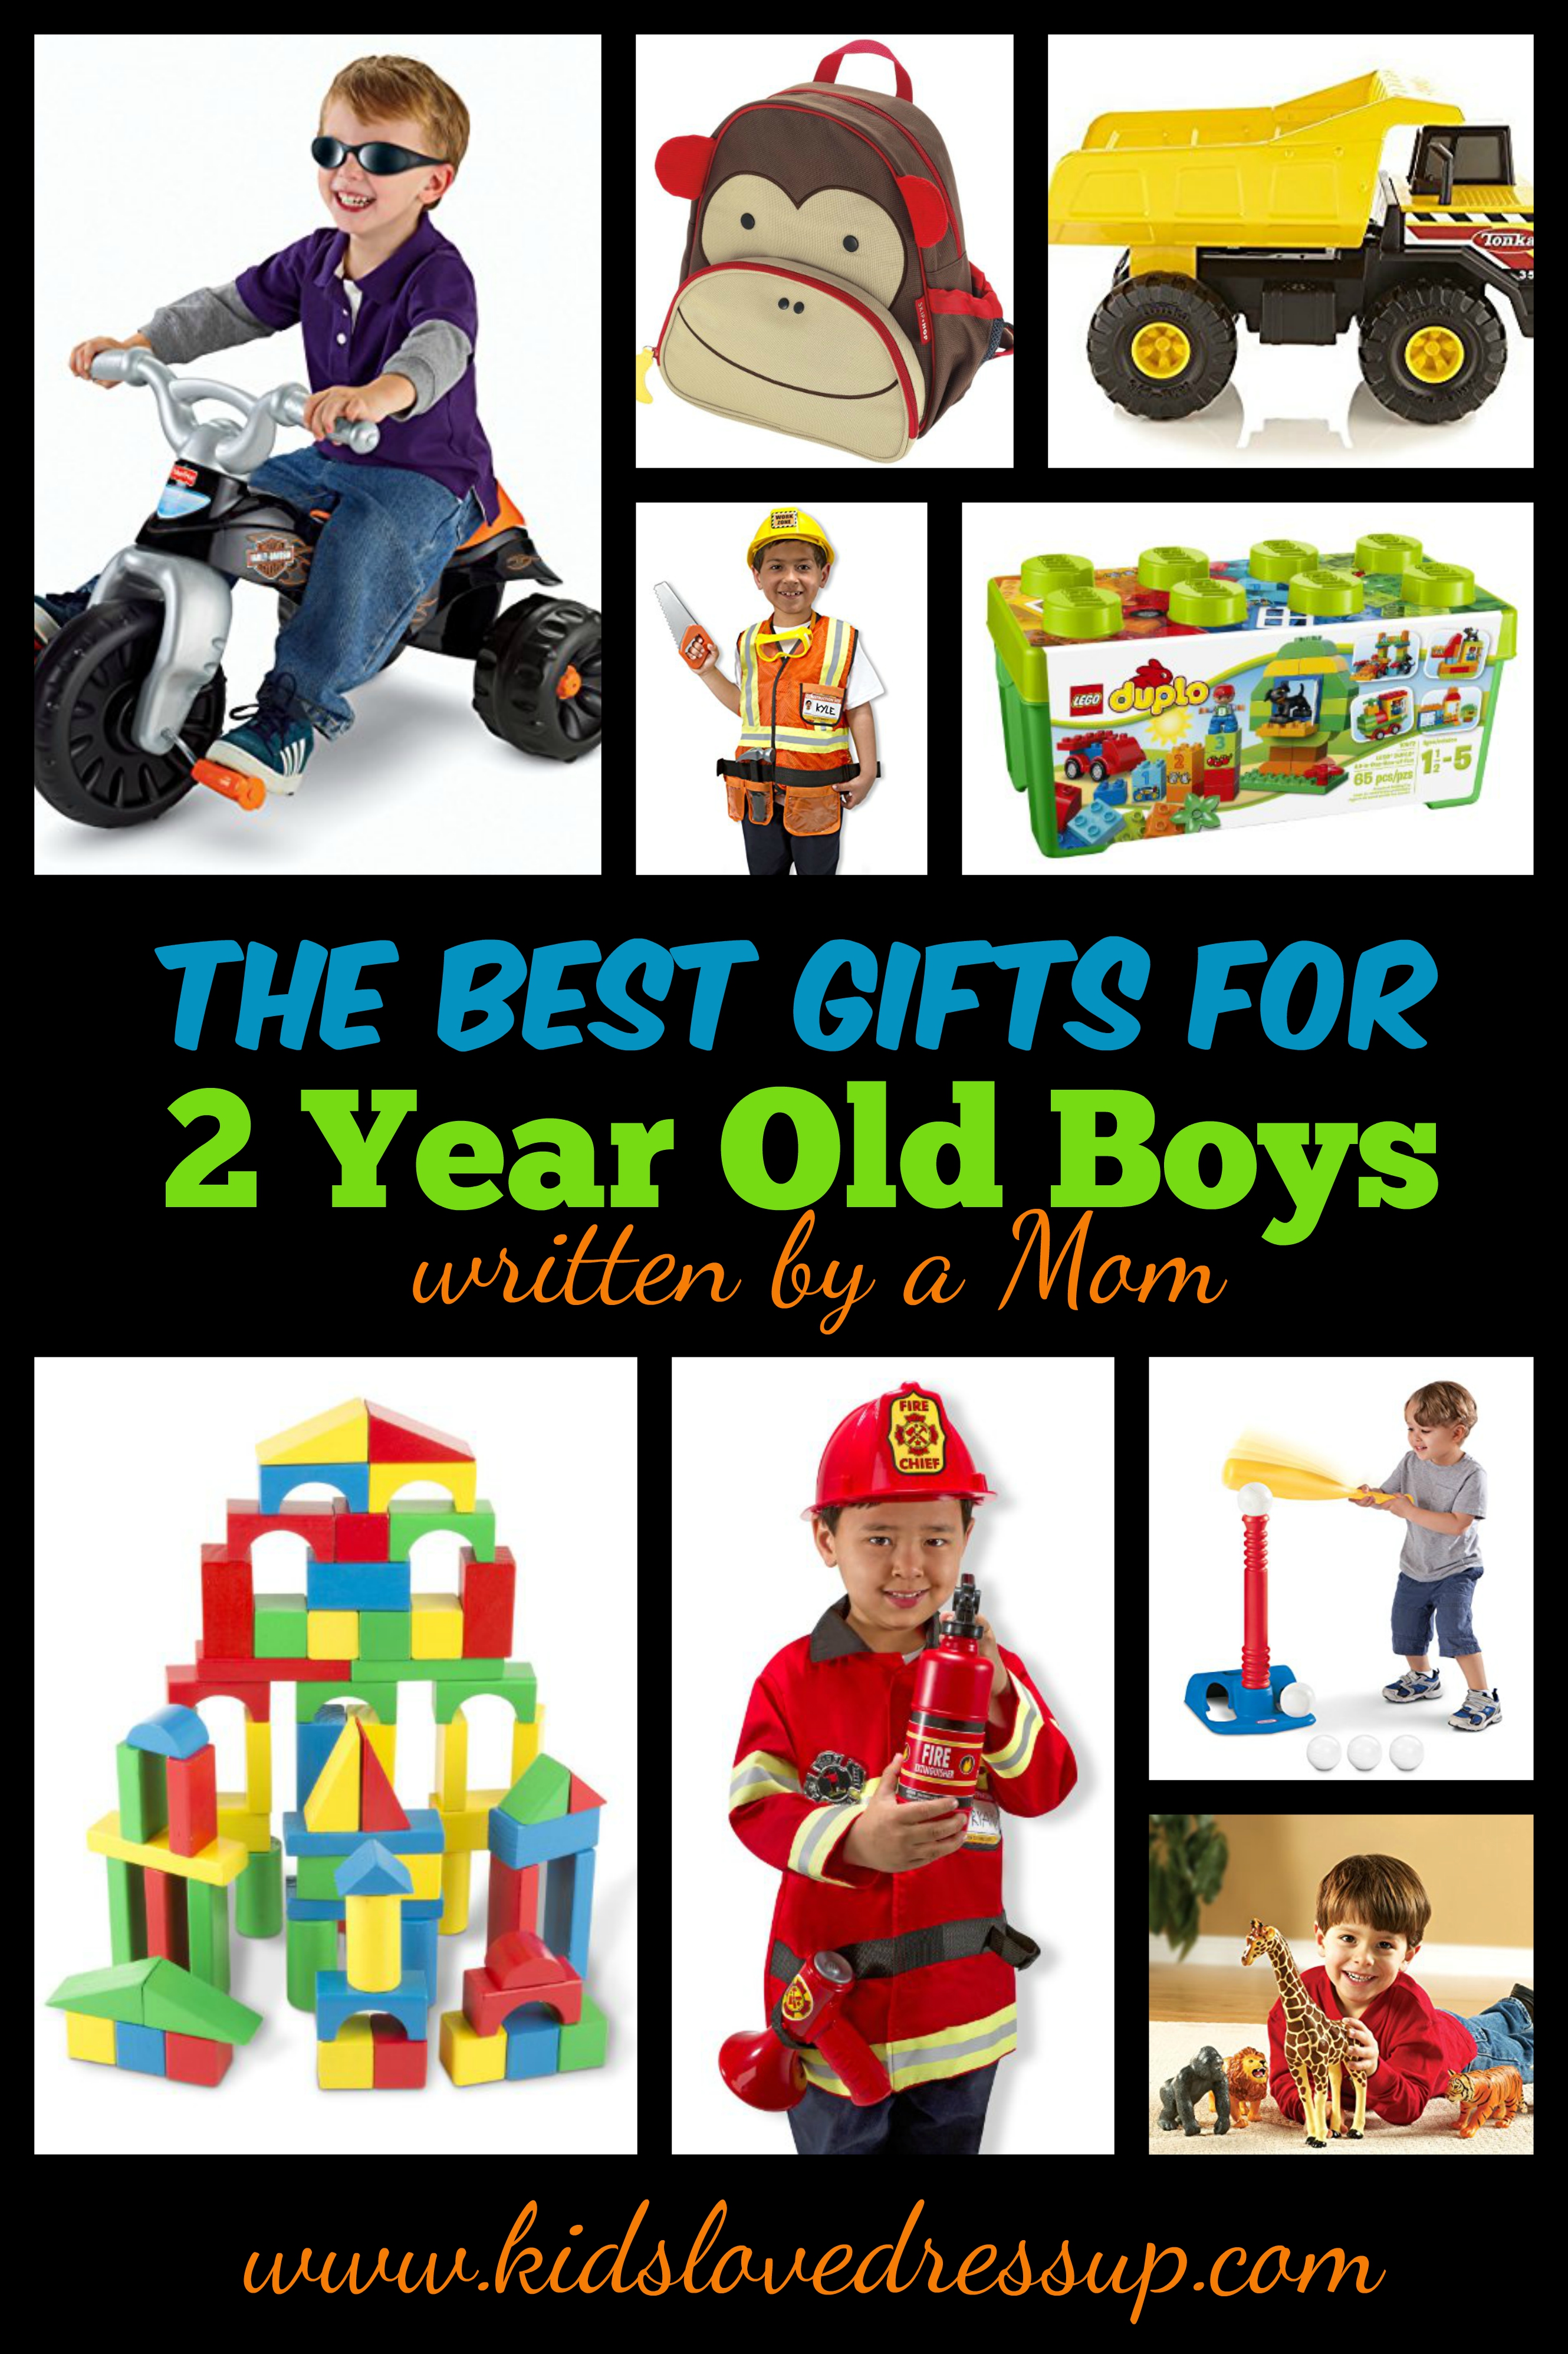 What are the best gifts for 2 year old boys? Check out these 10 awesome ideas, all under $30, as selected by a mom of a busy 2 year old boy! www.kidslovedressup.com